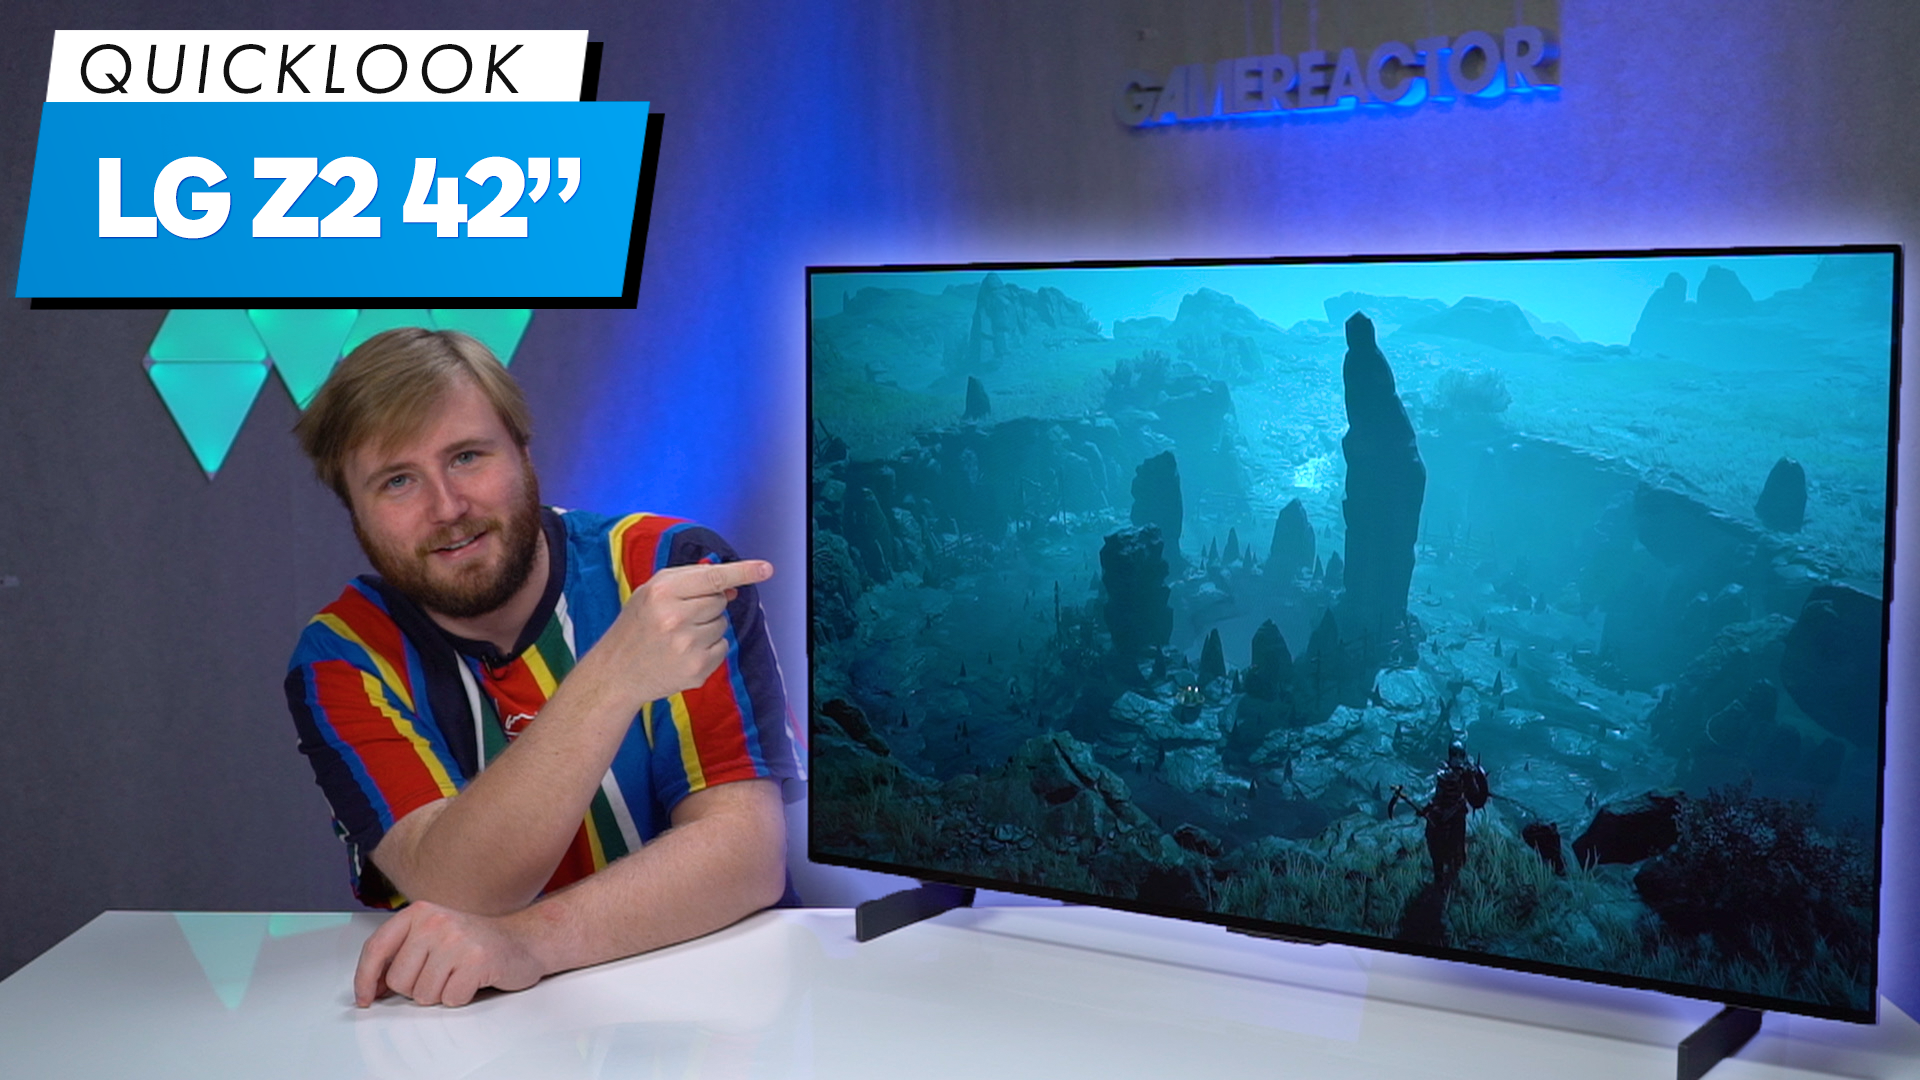 We already have the LG Z2 8K TV in our hands